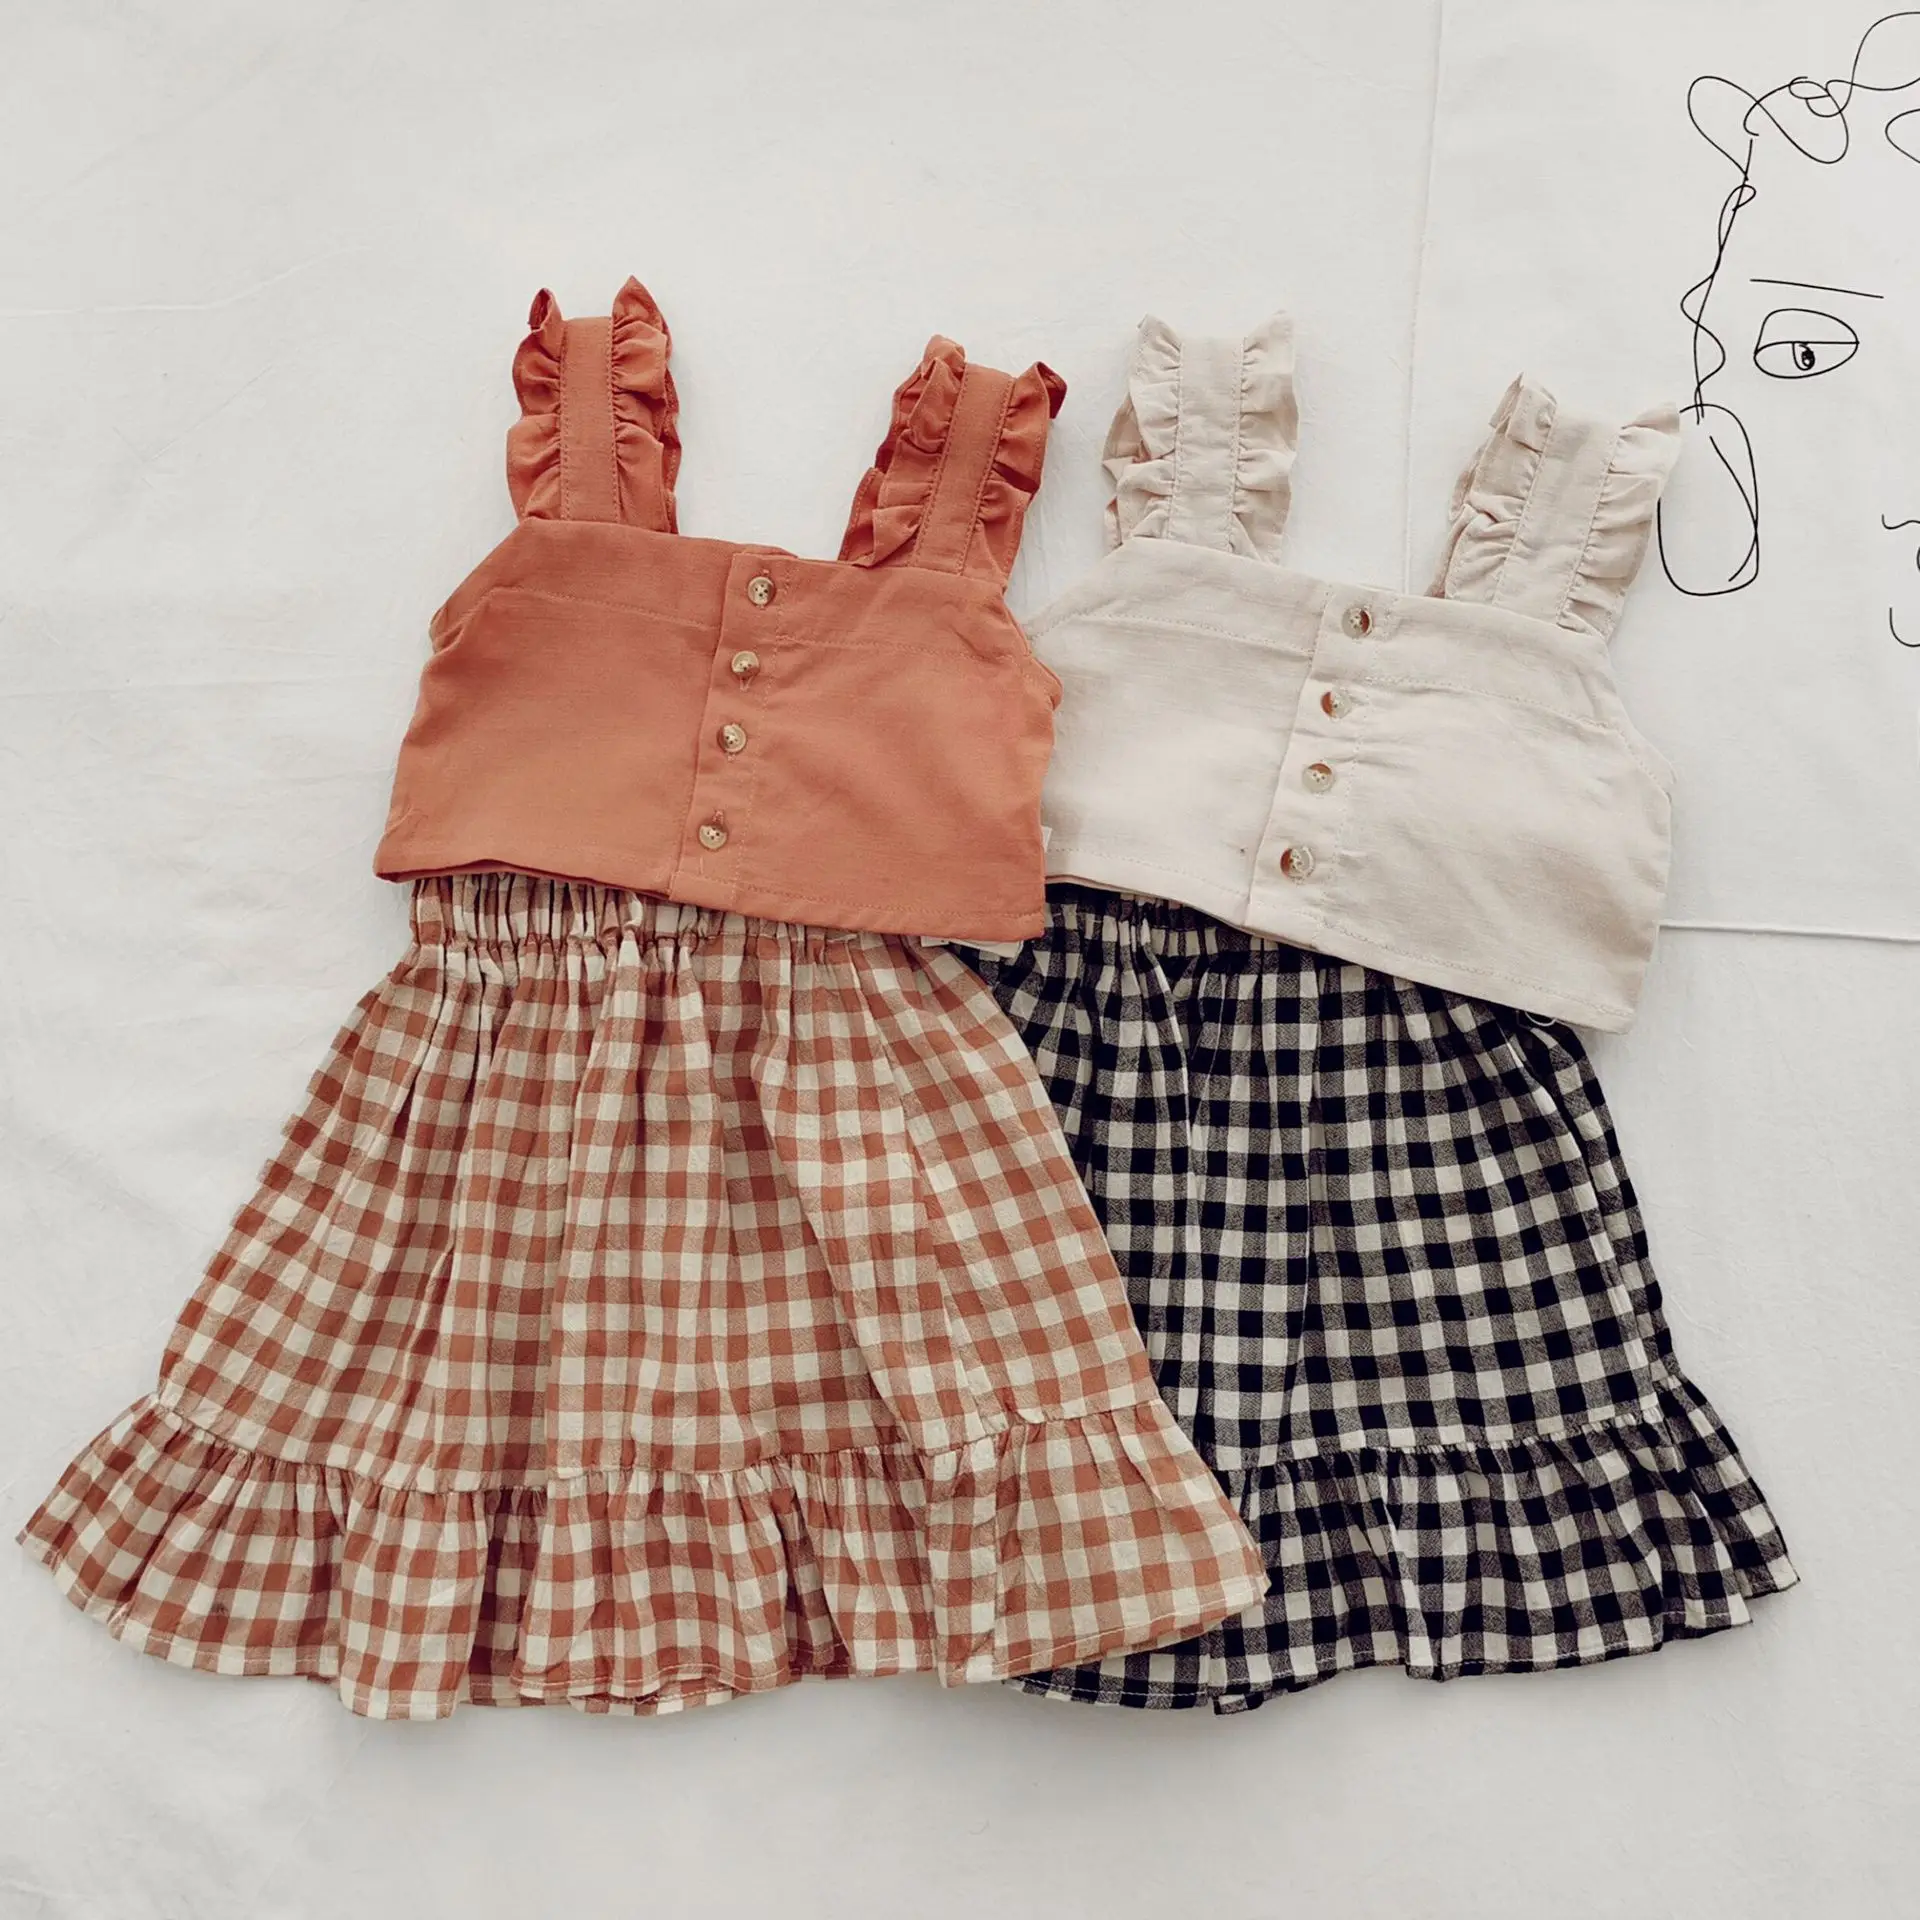 Girl Suit Condole Belt Short Money Jacket Adds Plaid Skirt 22 Summer Outfit New Fund